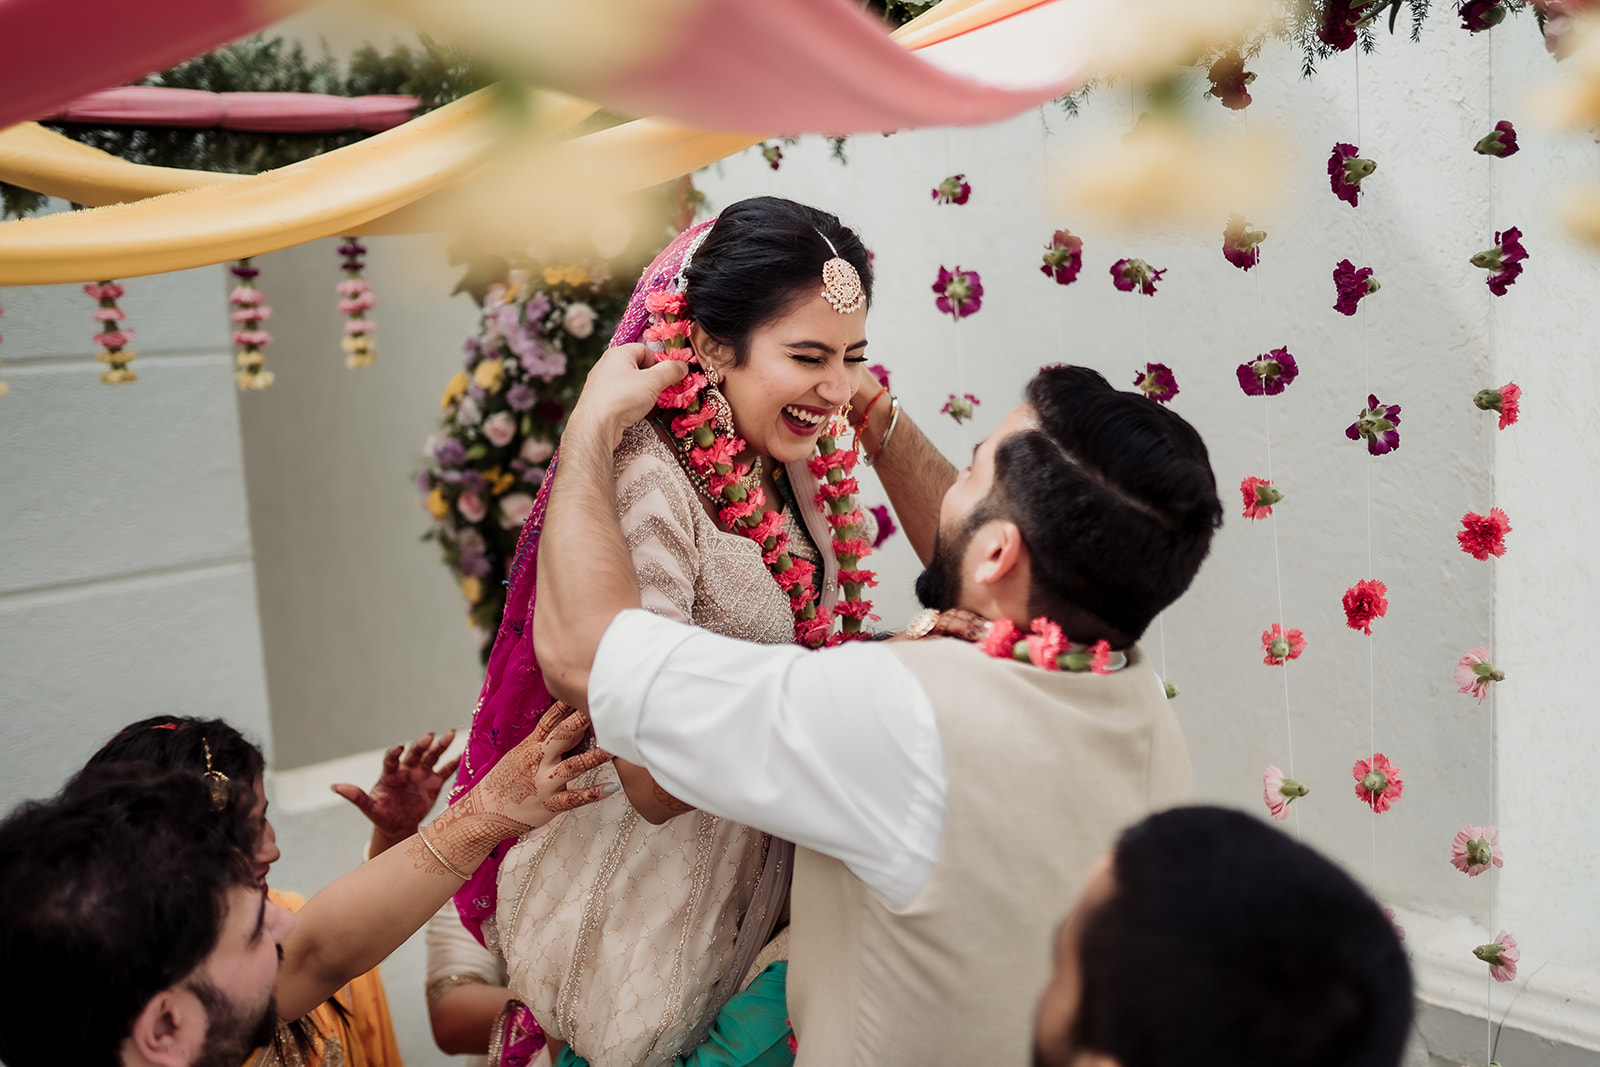 Garland exchange: A joyful moment as the bride and groom lovingly exchange floral garlands during the ceremony.